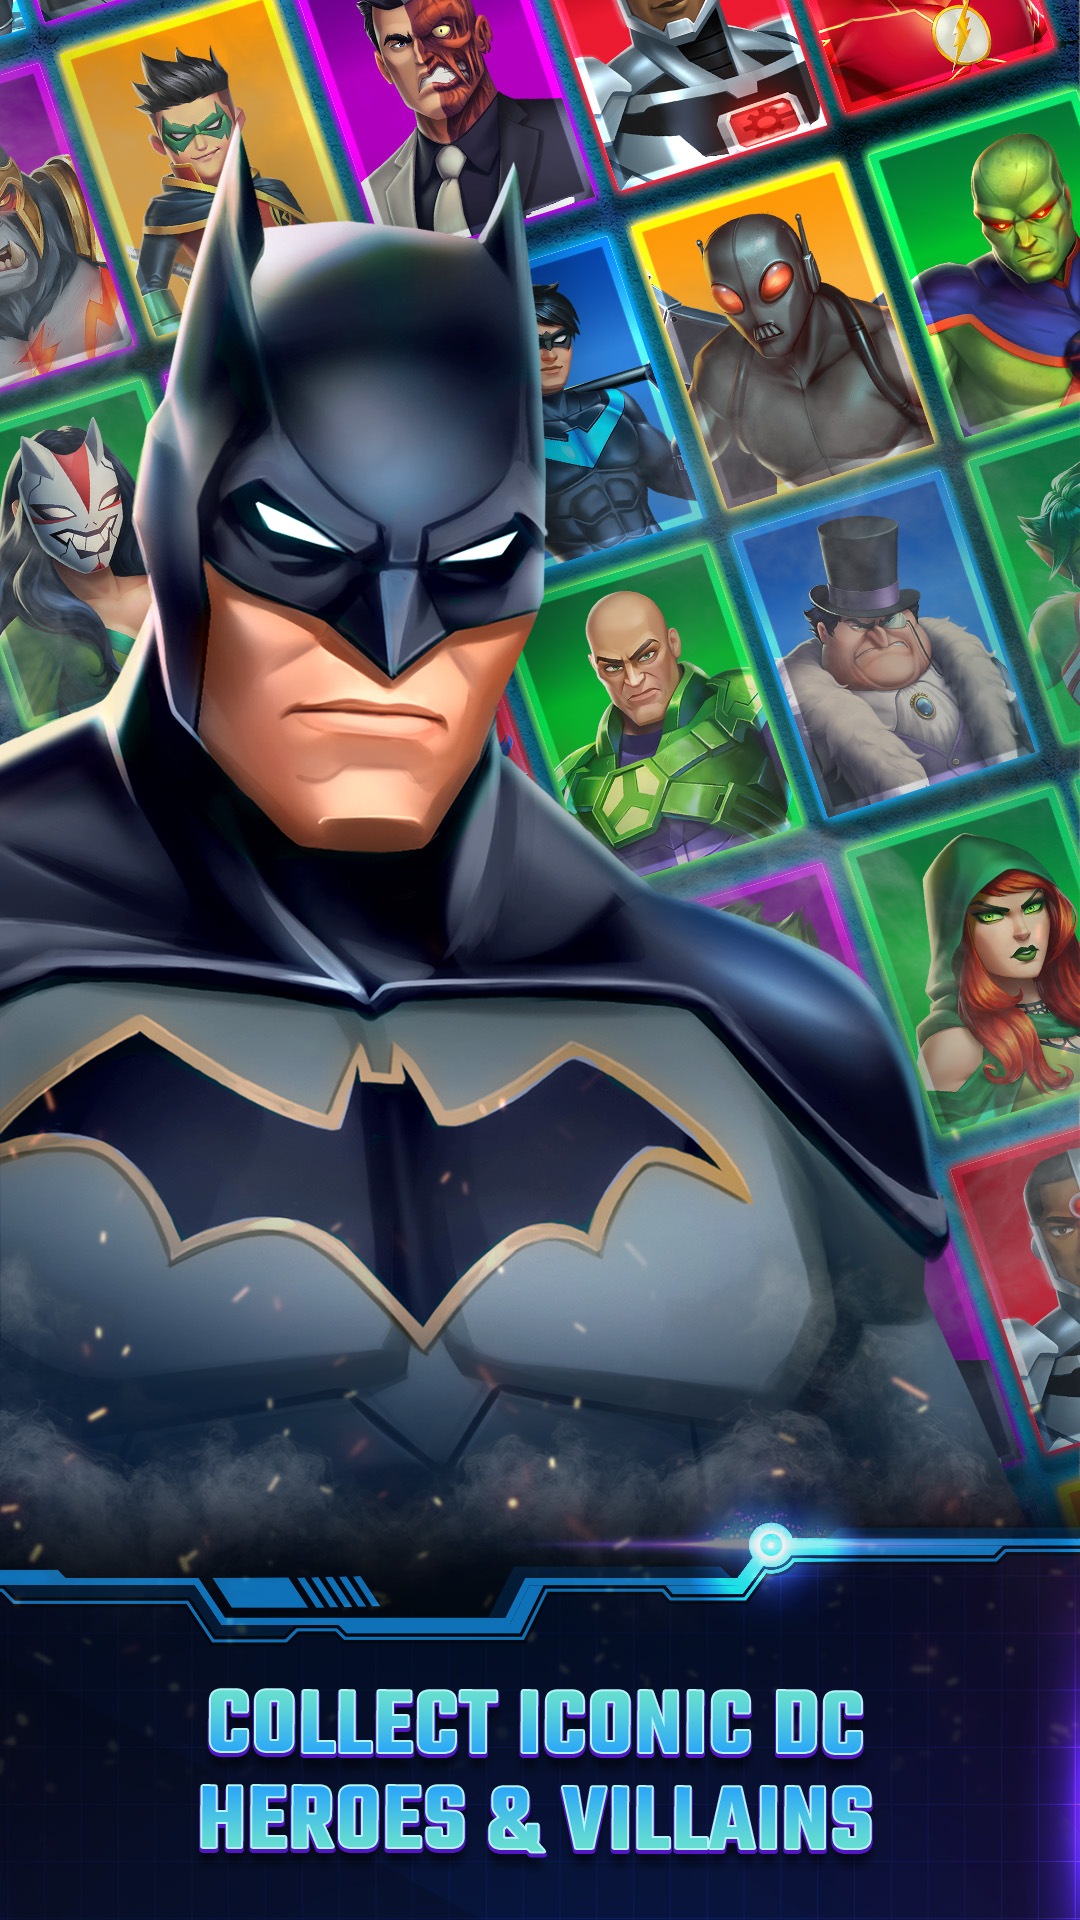 Scarica DC Heroes & Villains: Match 3 gratis per Android.